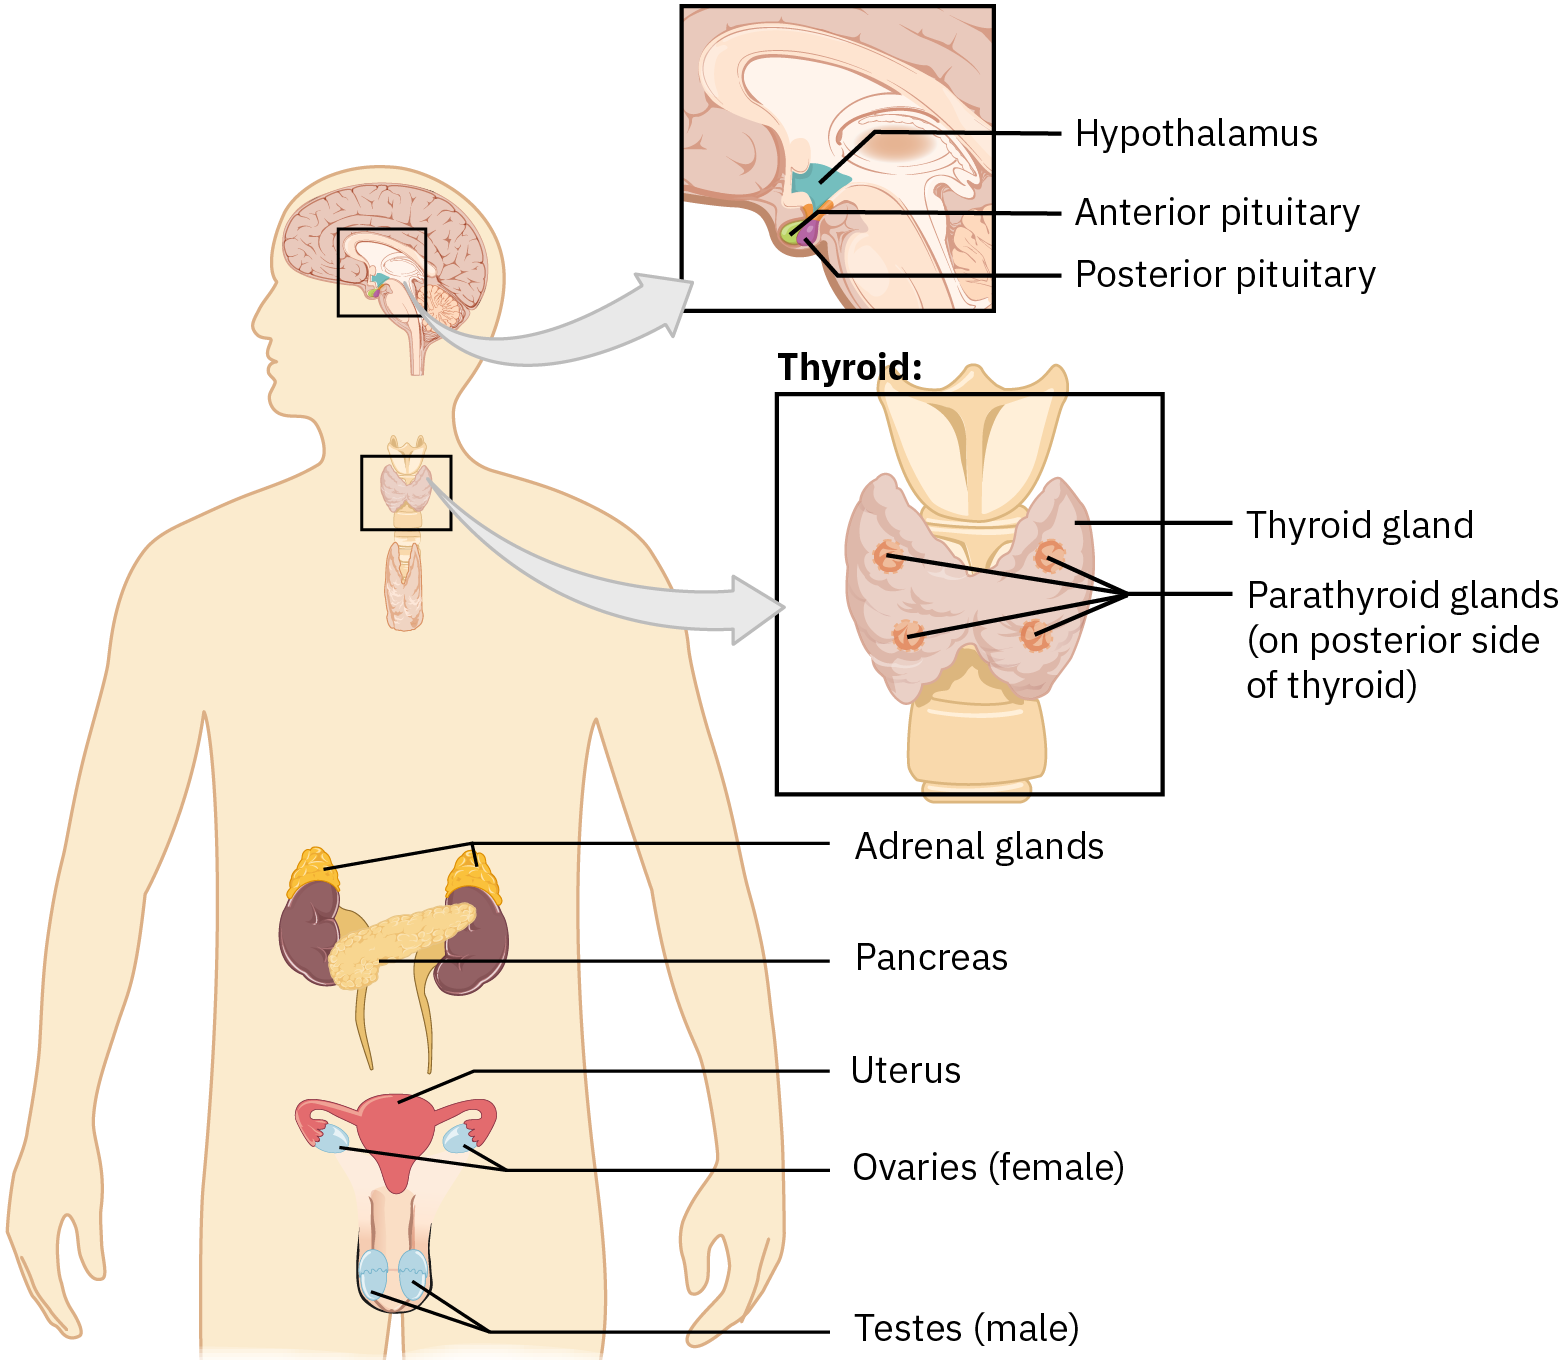 The primary glands of the endocrine system are the hypothalamus, anterior pituitary, and posterior pituitary (located near the brain); thyroid gland and parathyroid gland (located in the neck); adrenal glands, pancreas, uterus, and ovaries (located in the abdomen); and testes (located in the groin).